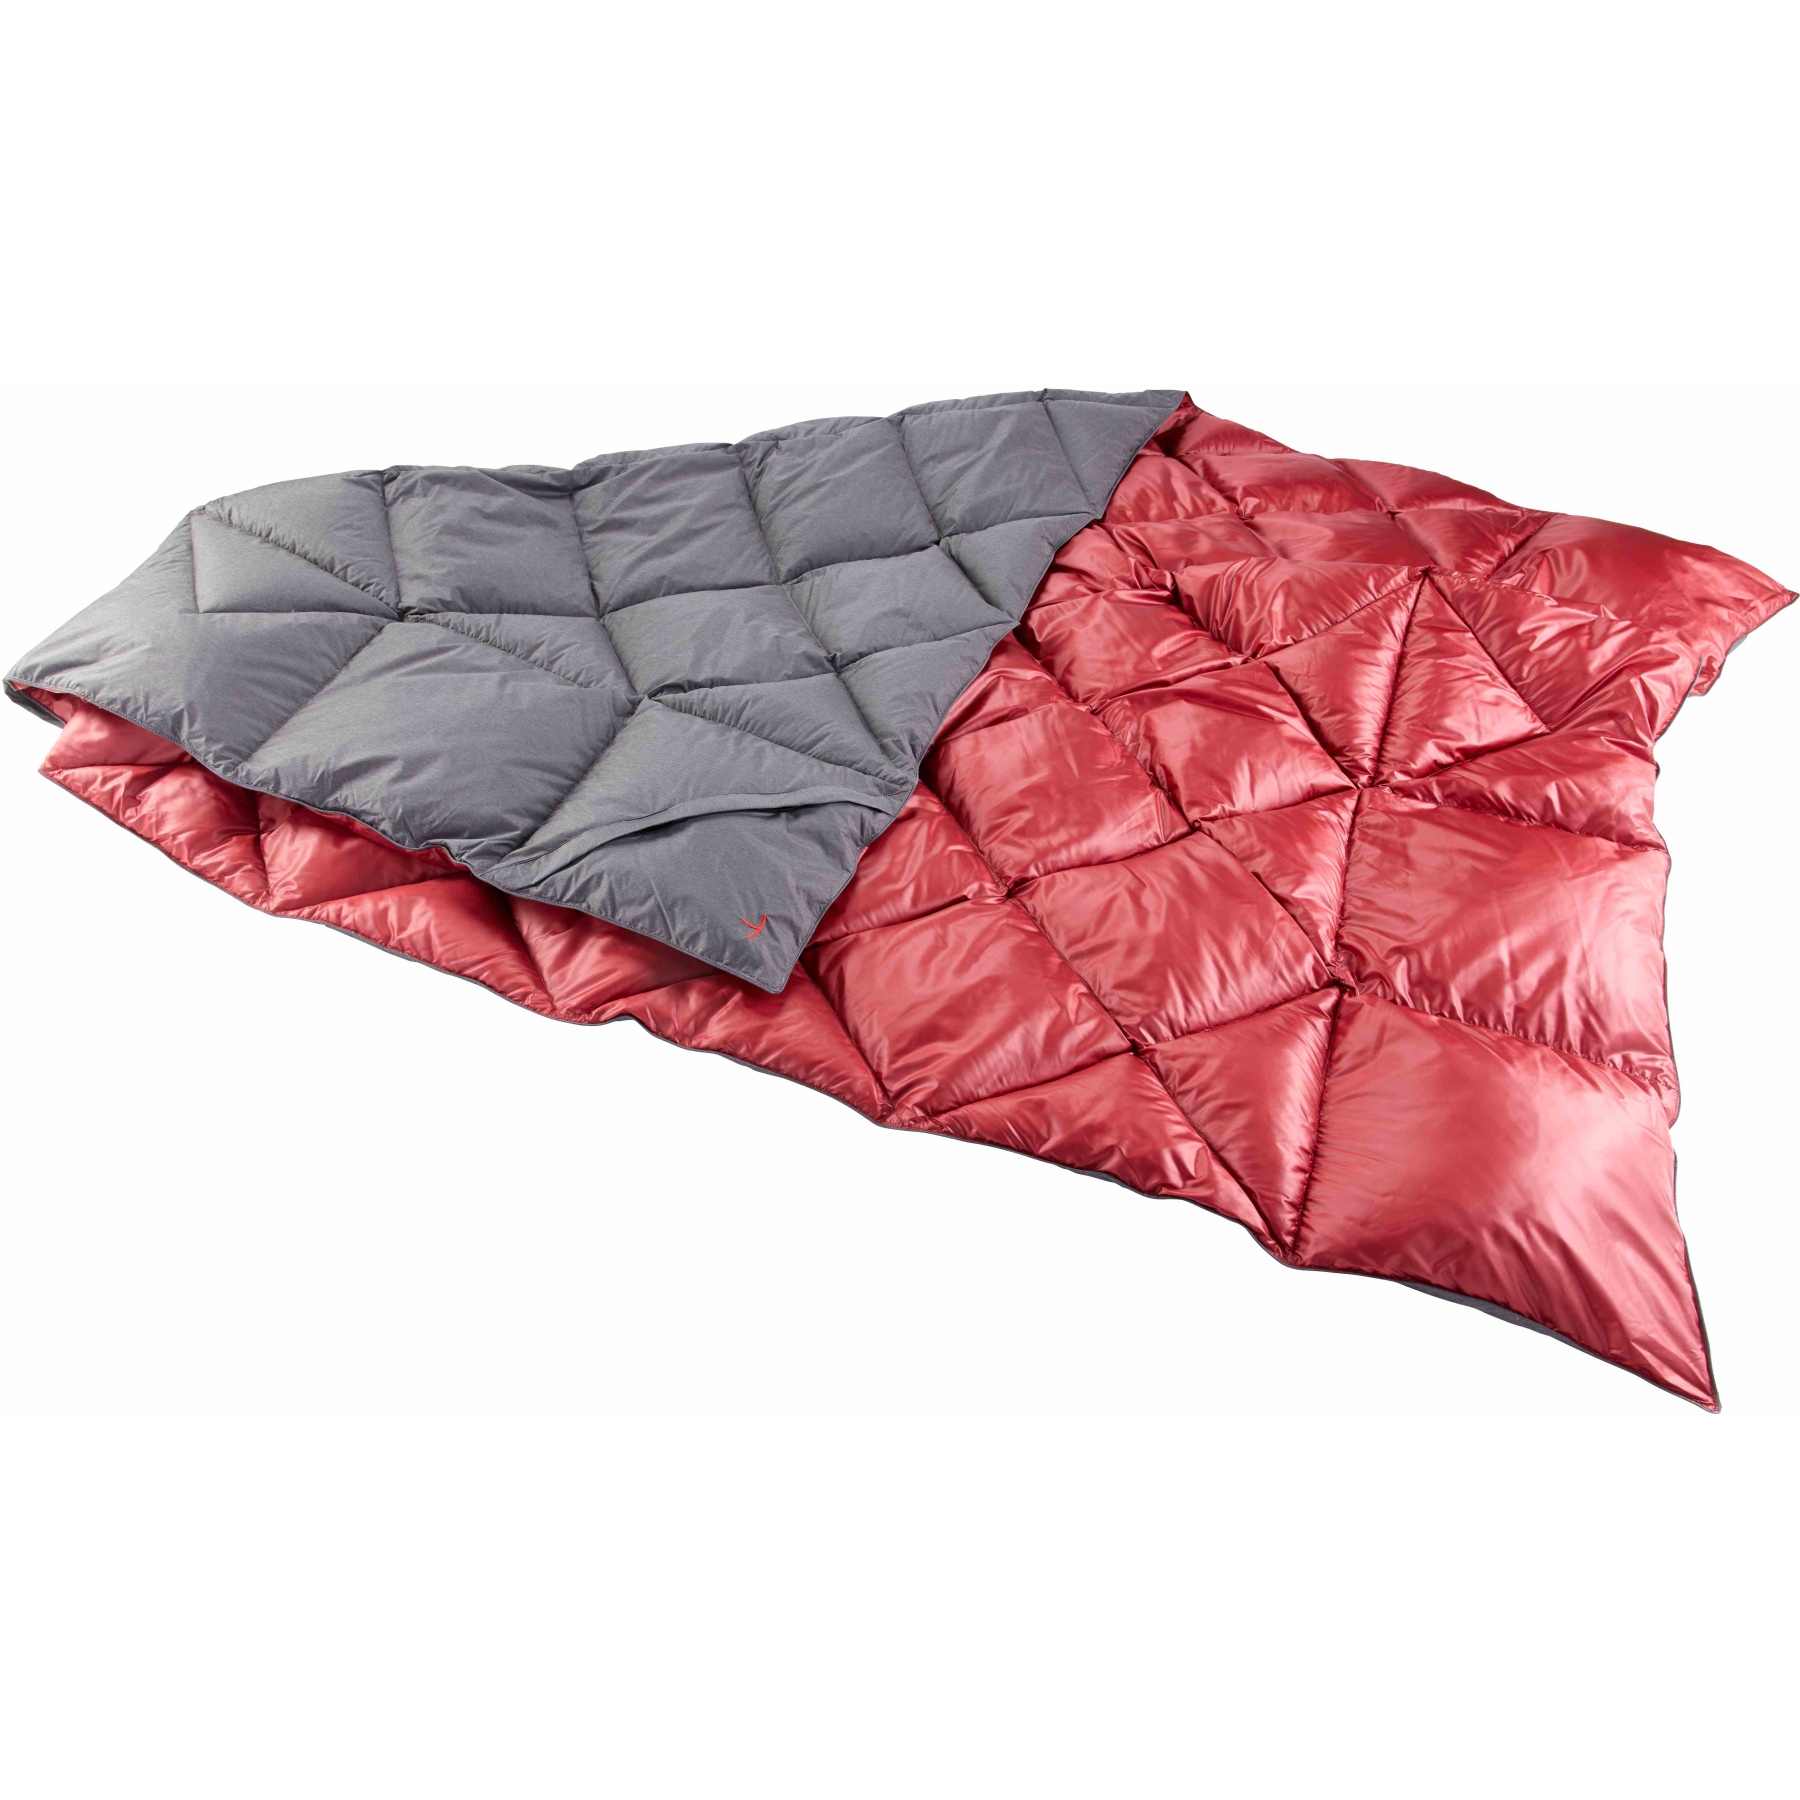 Picture of Y by Nordisk Kiby Travel Blanket - coal grey/cranberry red